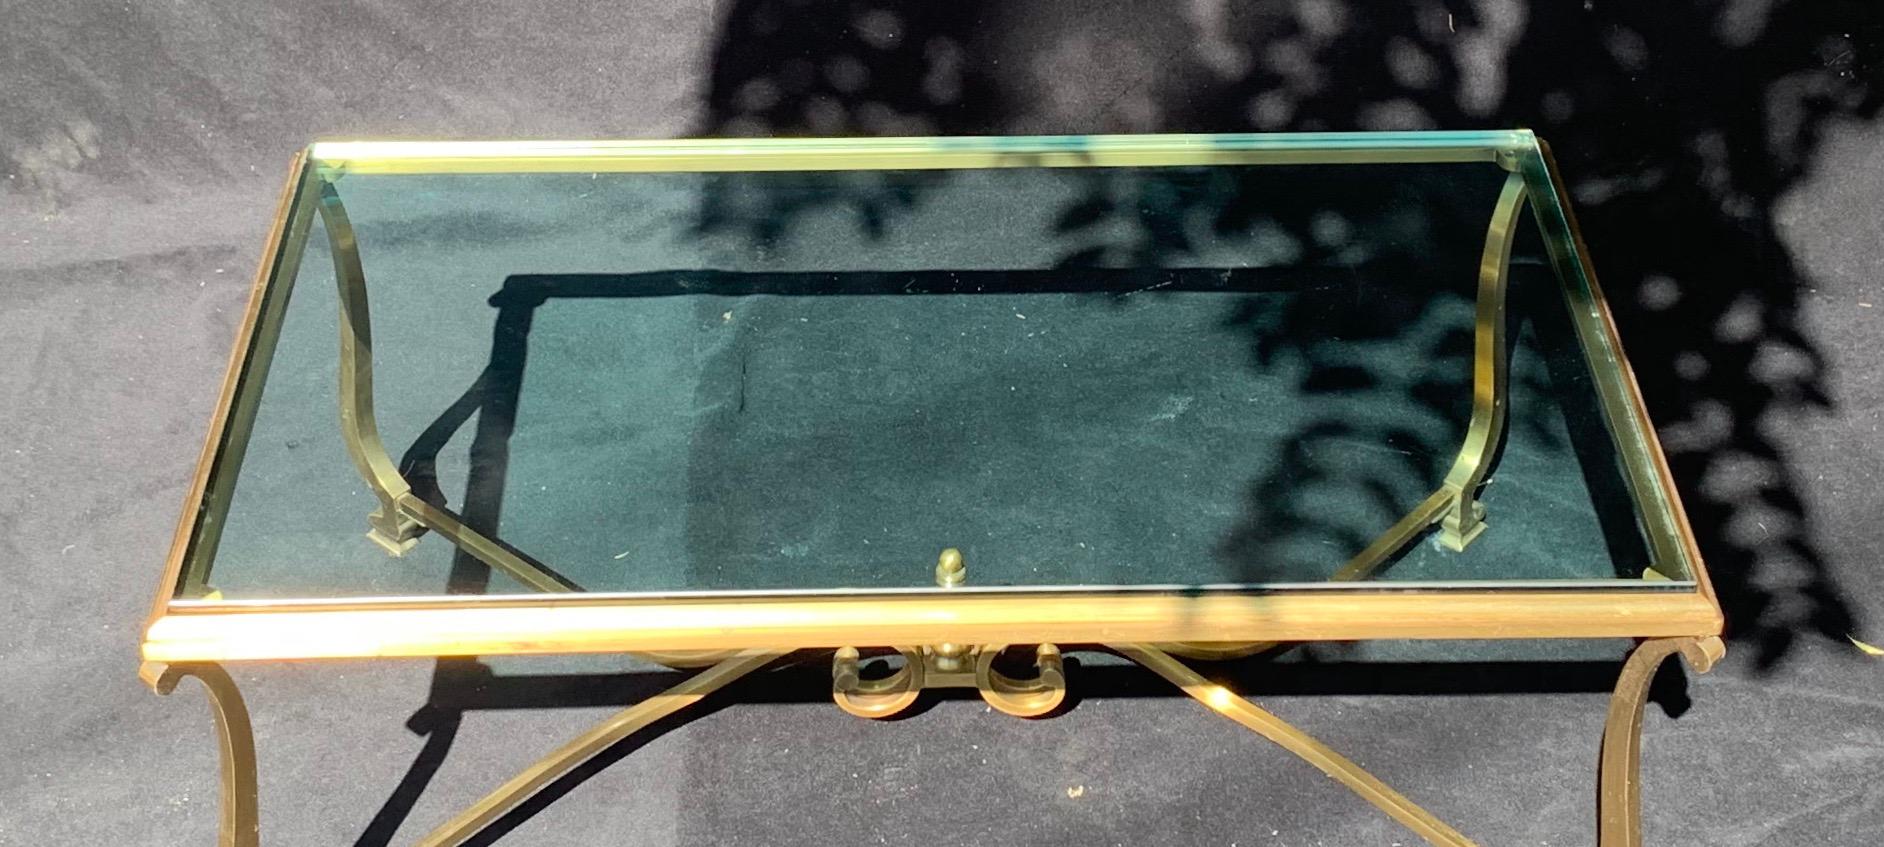 A wonderful French gilt bronze and glass top rectangular coffee / cocktail table
Wear to bronze and glass top due to regular use.